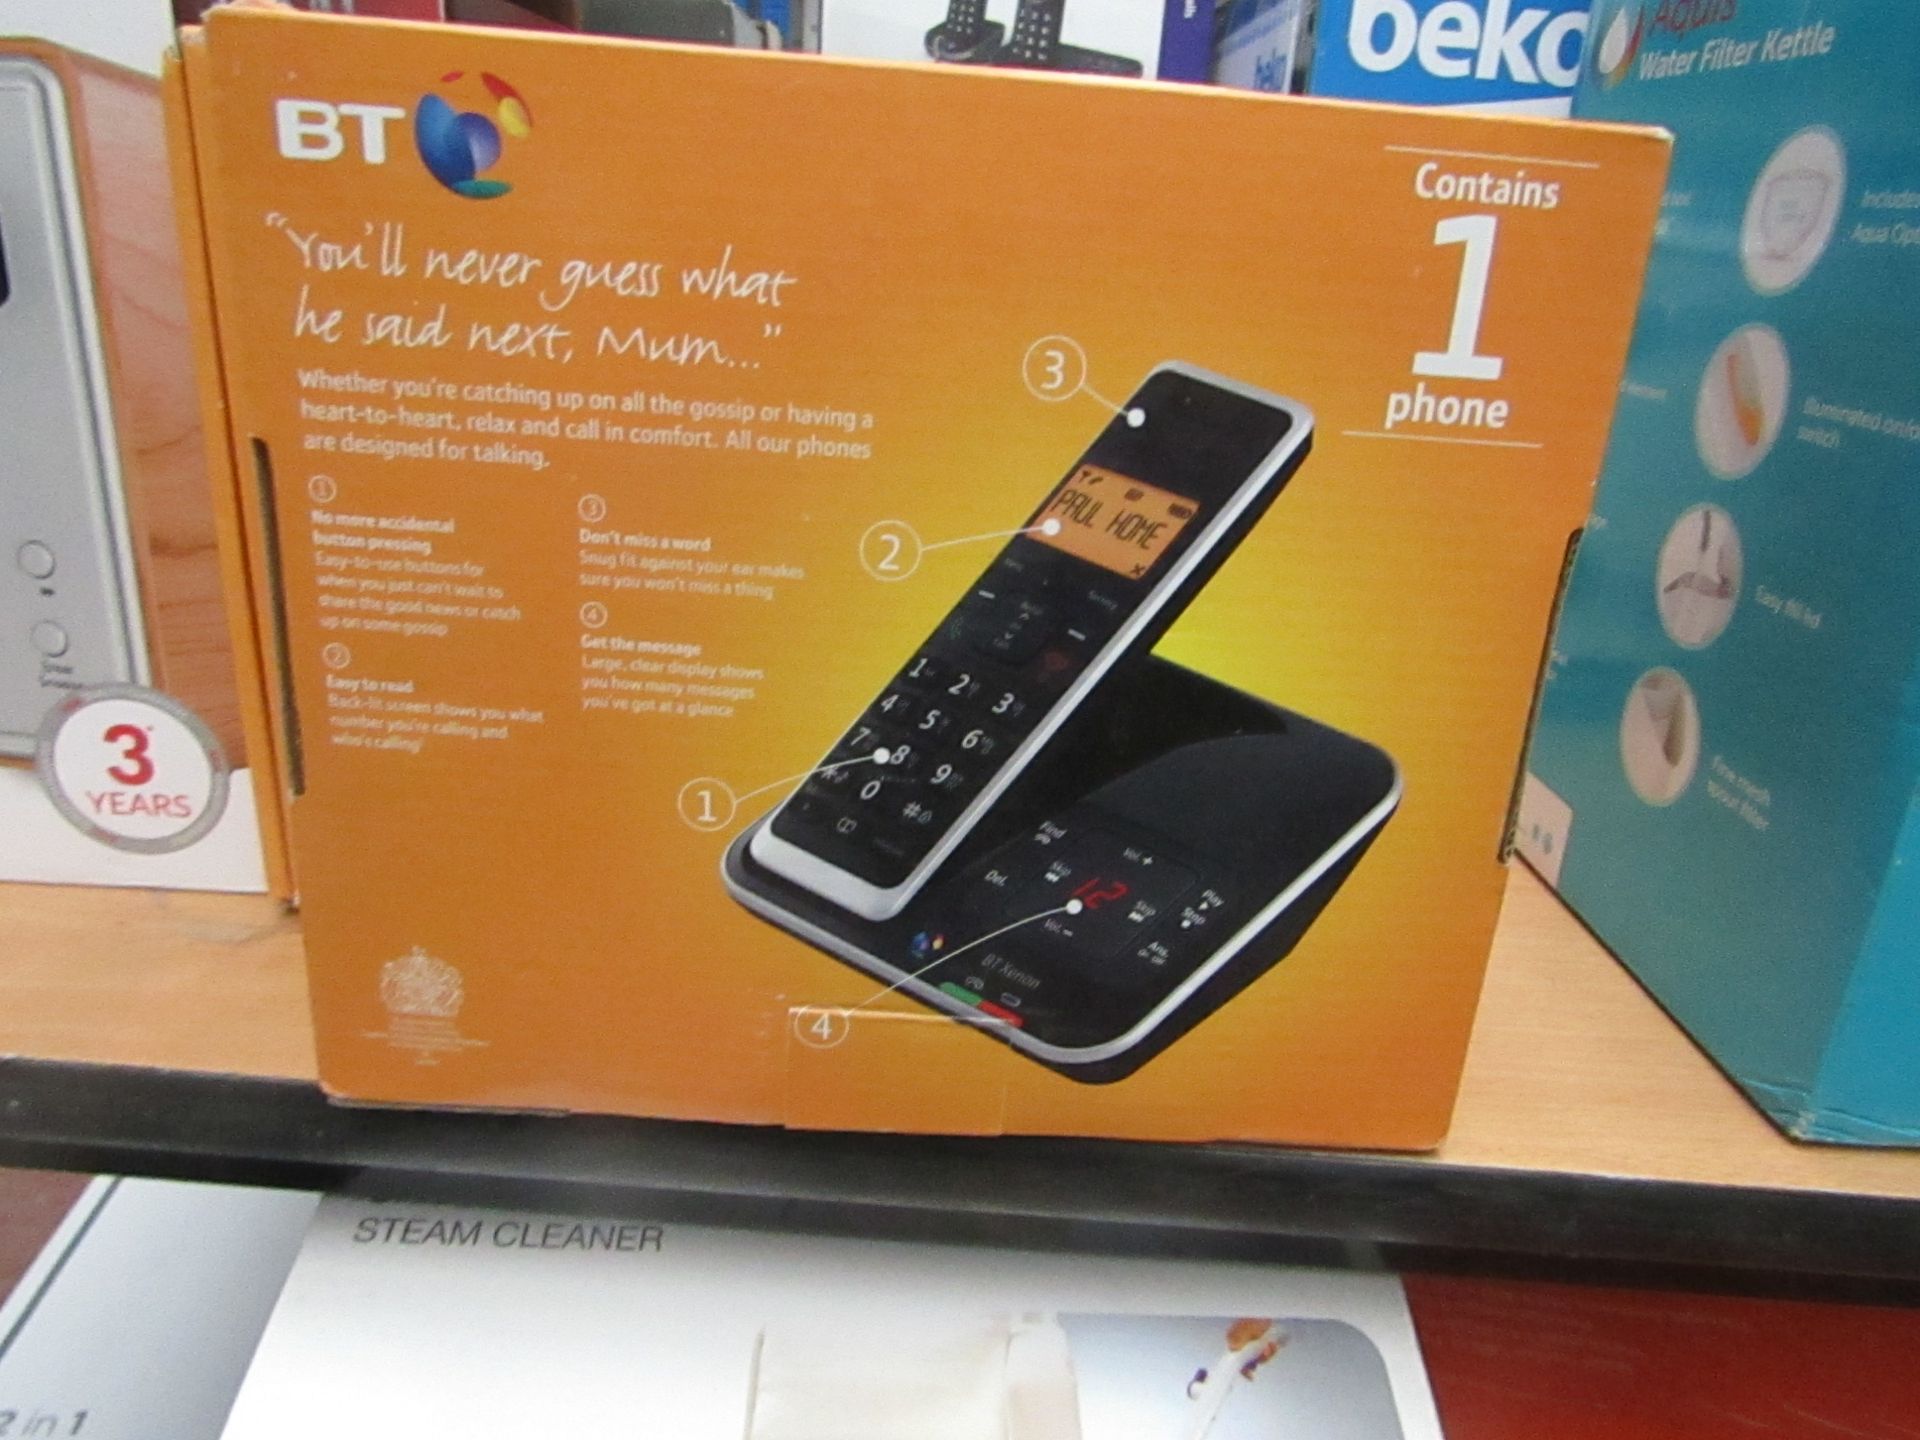 BT Xenon 1500 home phone with answering machine single, untested but complete and boxed.